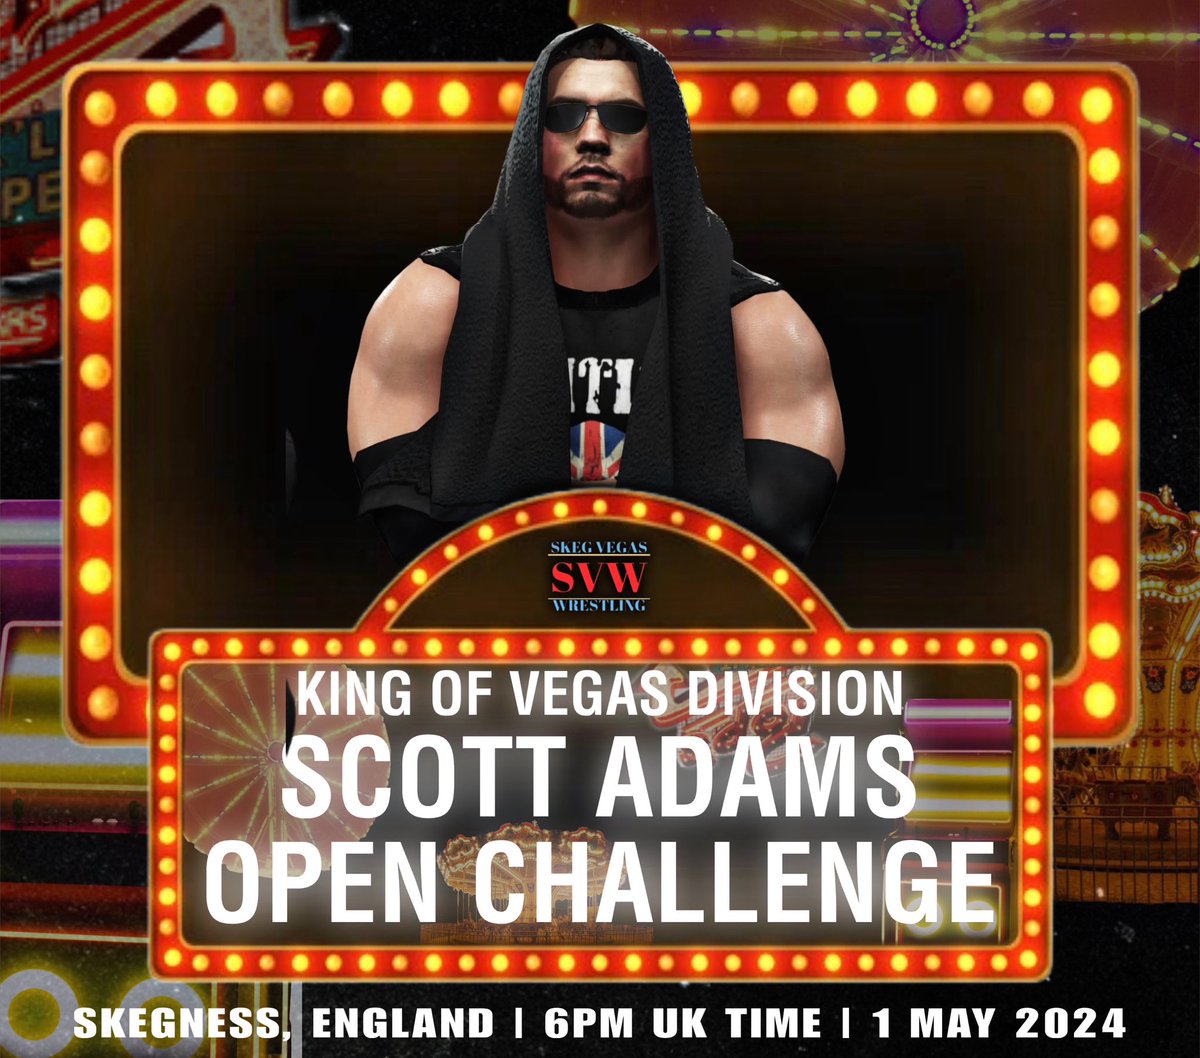 The first 4 matches for @SVegasWrestling (WWE 2K24) Episode 1 live streaming Wednesday at 6PM UK time on the Skeg Vegas Wrestling YouTube channel youtube.com/@skegvegaswres… #likeforlikes #like #likeforlikeback #likesforlike #likeforfollow #liketime #wwe2k24 #skegvegaswrestling